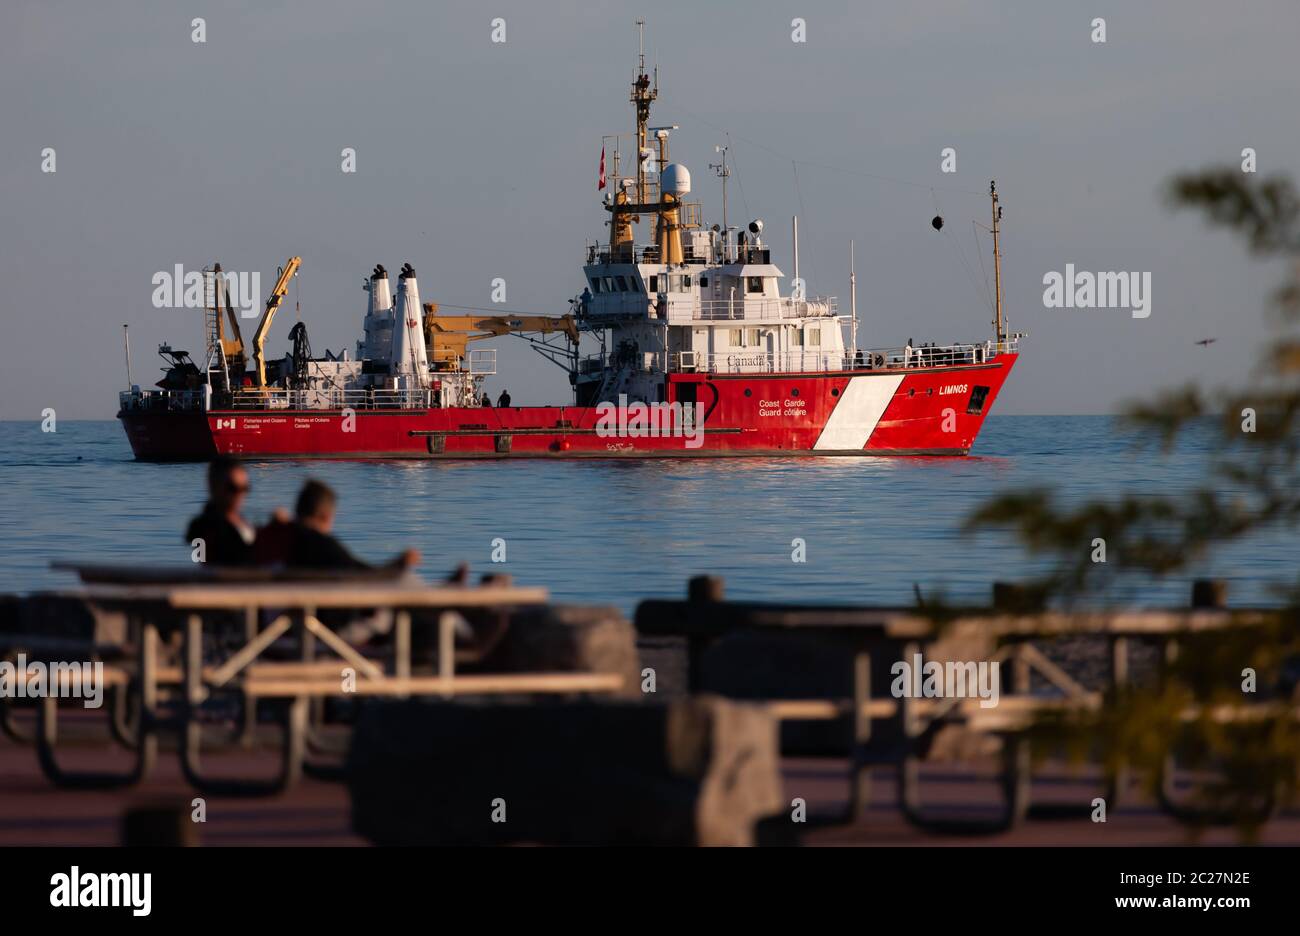 Port Stanley, Canada - June 16, 2020. The Canadian Coast Guard Ship Limnos sits anchored on Lake Erie off the beach at Port Stanley while the ship and crew conduct training exercises. Mark Spowart/Alamy Live News. Stock Photo